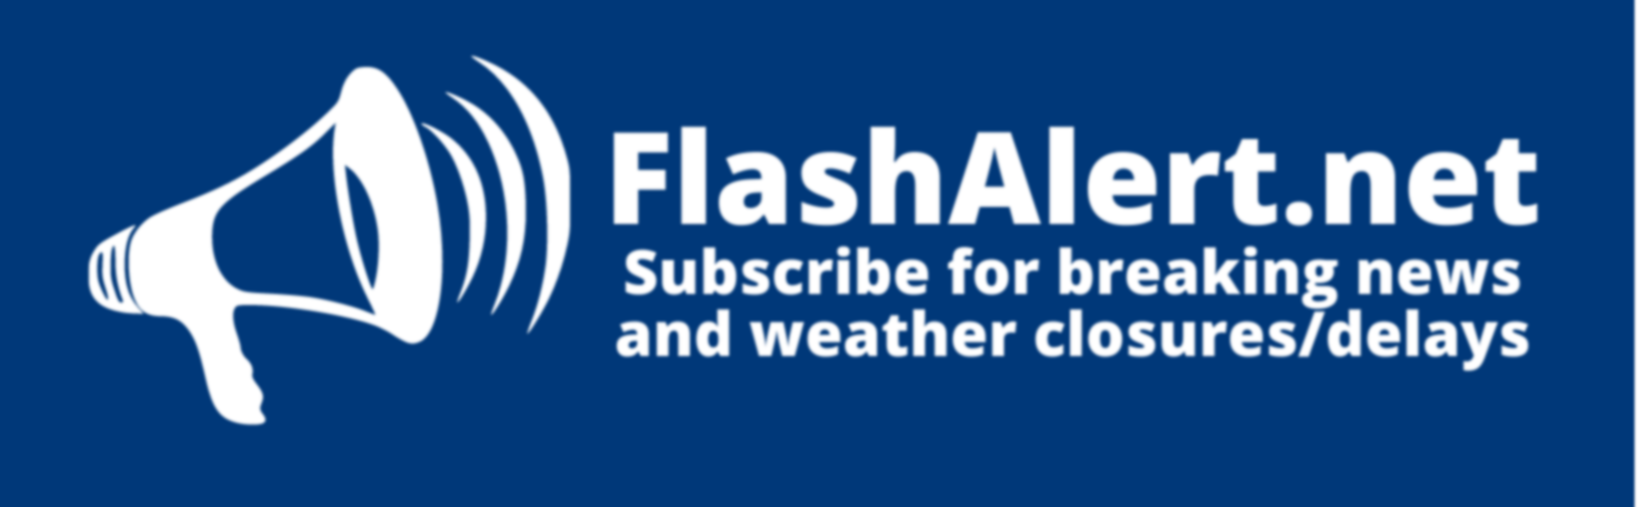 Megaphone icon with "FlashAlert.net, Subscribe for breaking news and weather closures/delays"